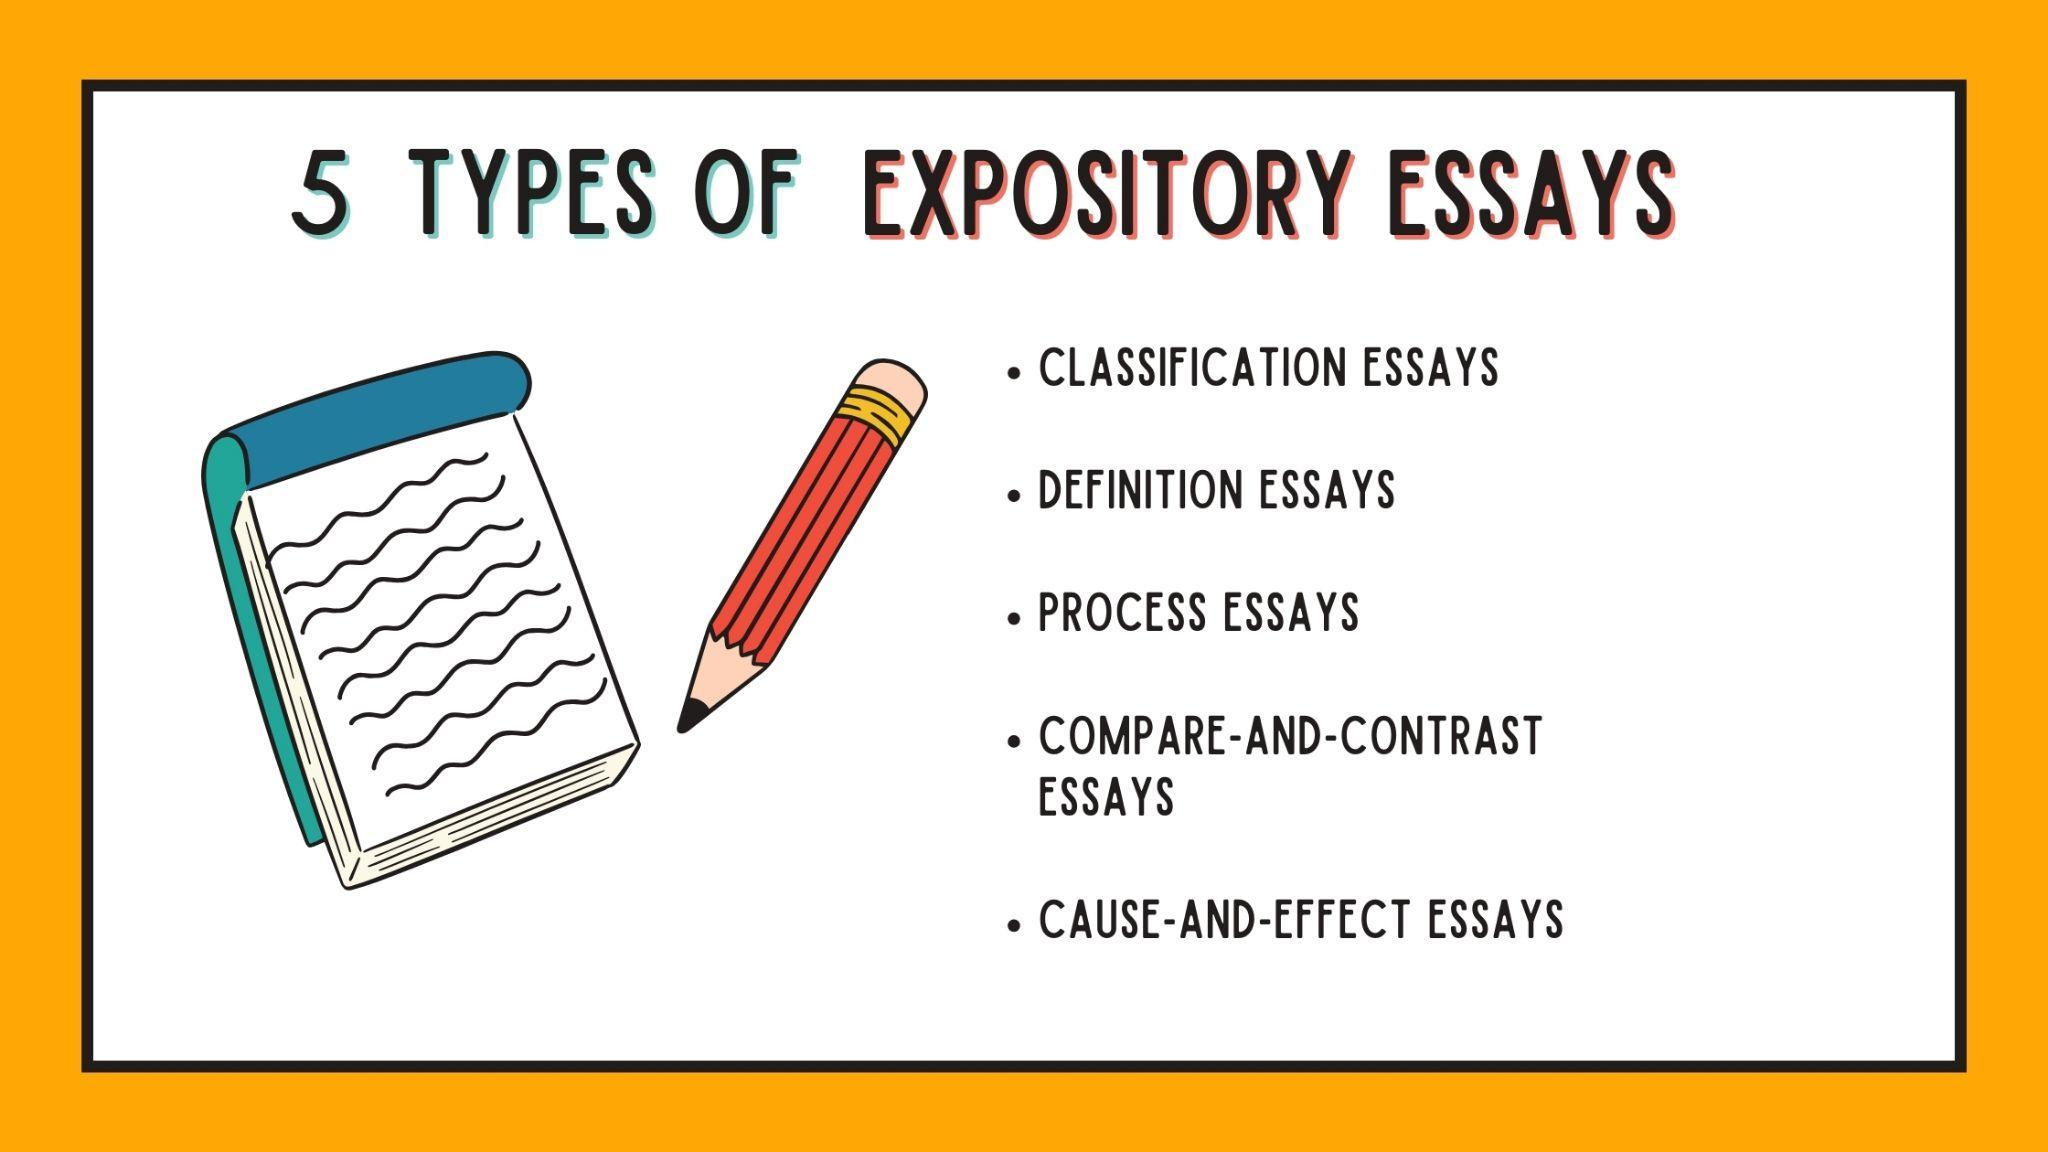 5 Types of Expository Essays